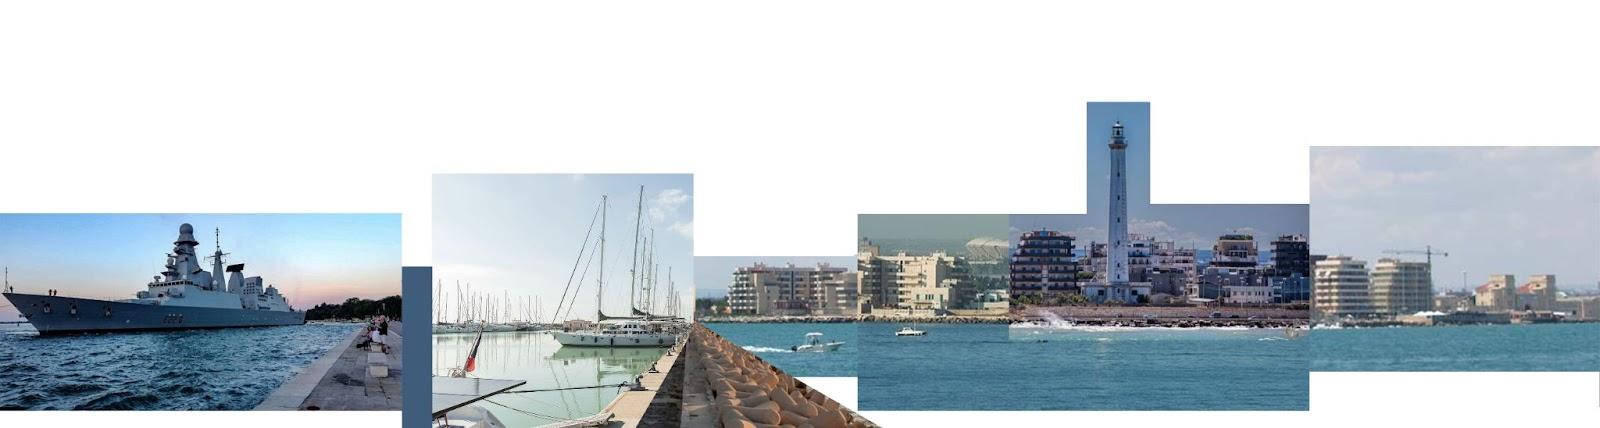 Reporting from the Workshop “Ti Porto a Bari”: A Landscape Exercise for the Port-City Relations in Bari